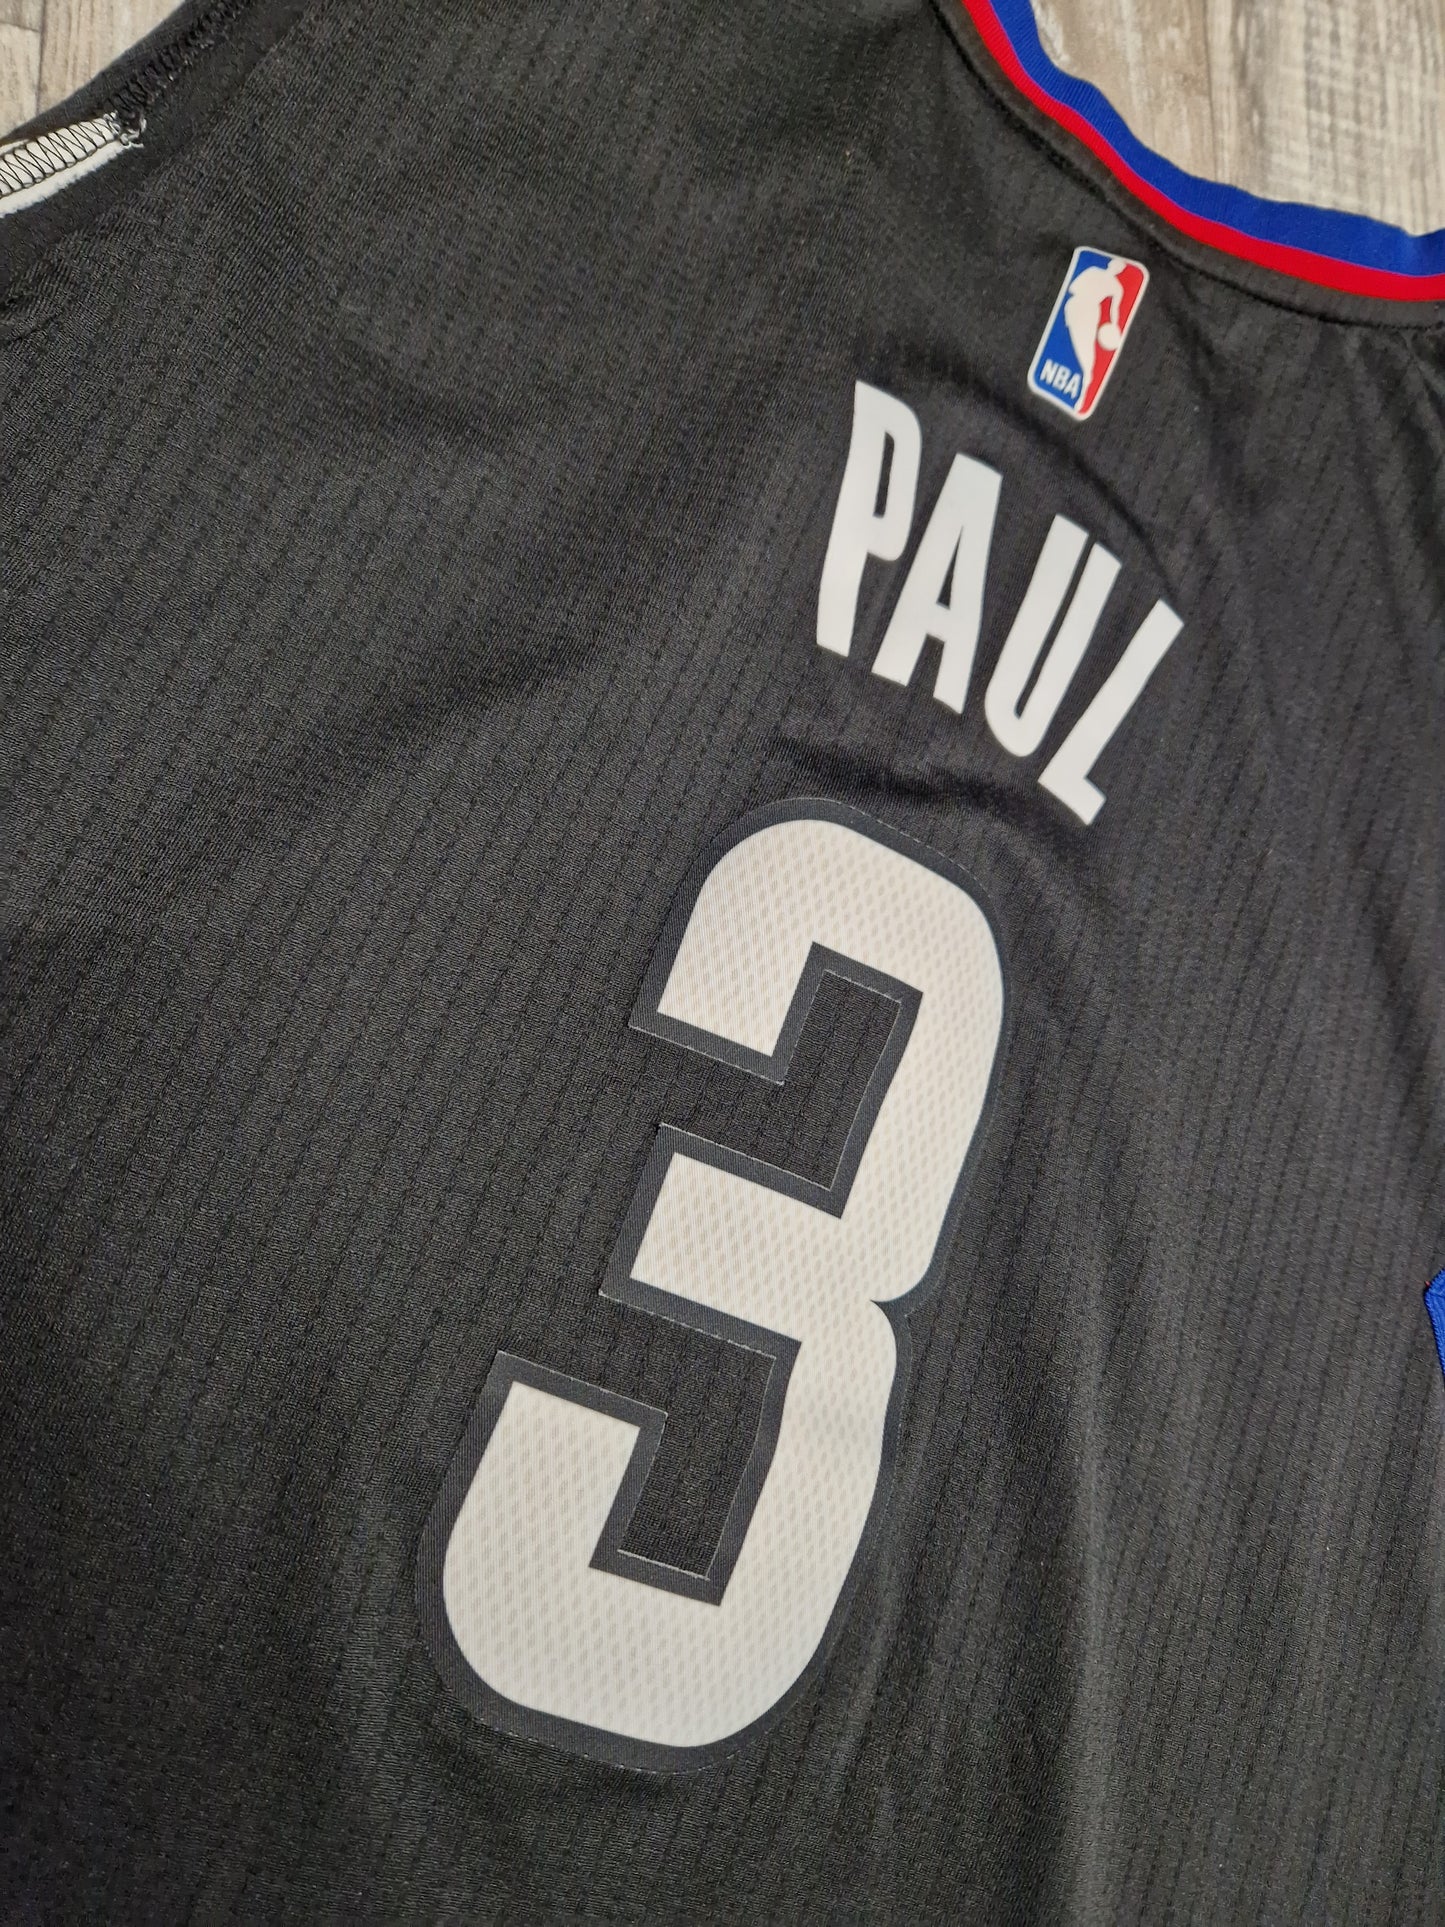 Chris Paul Los Angeles Clippers Jersey Size XL